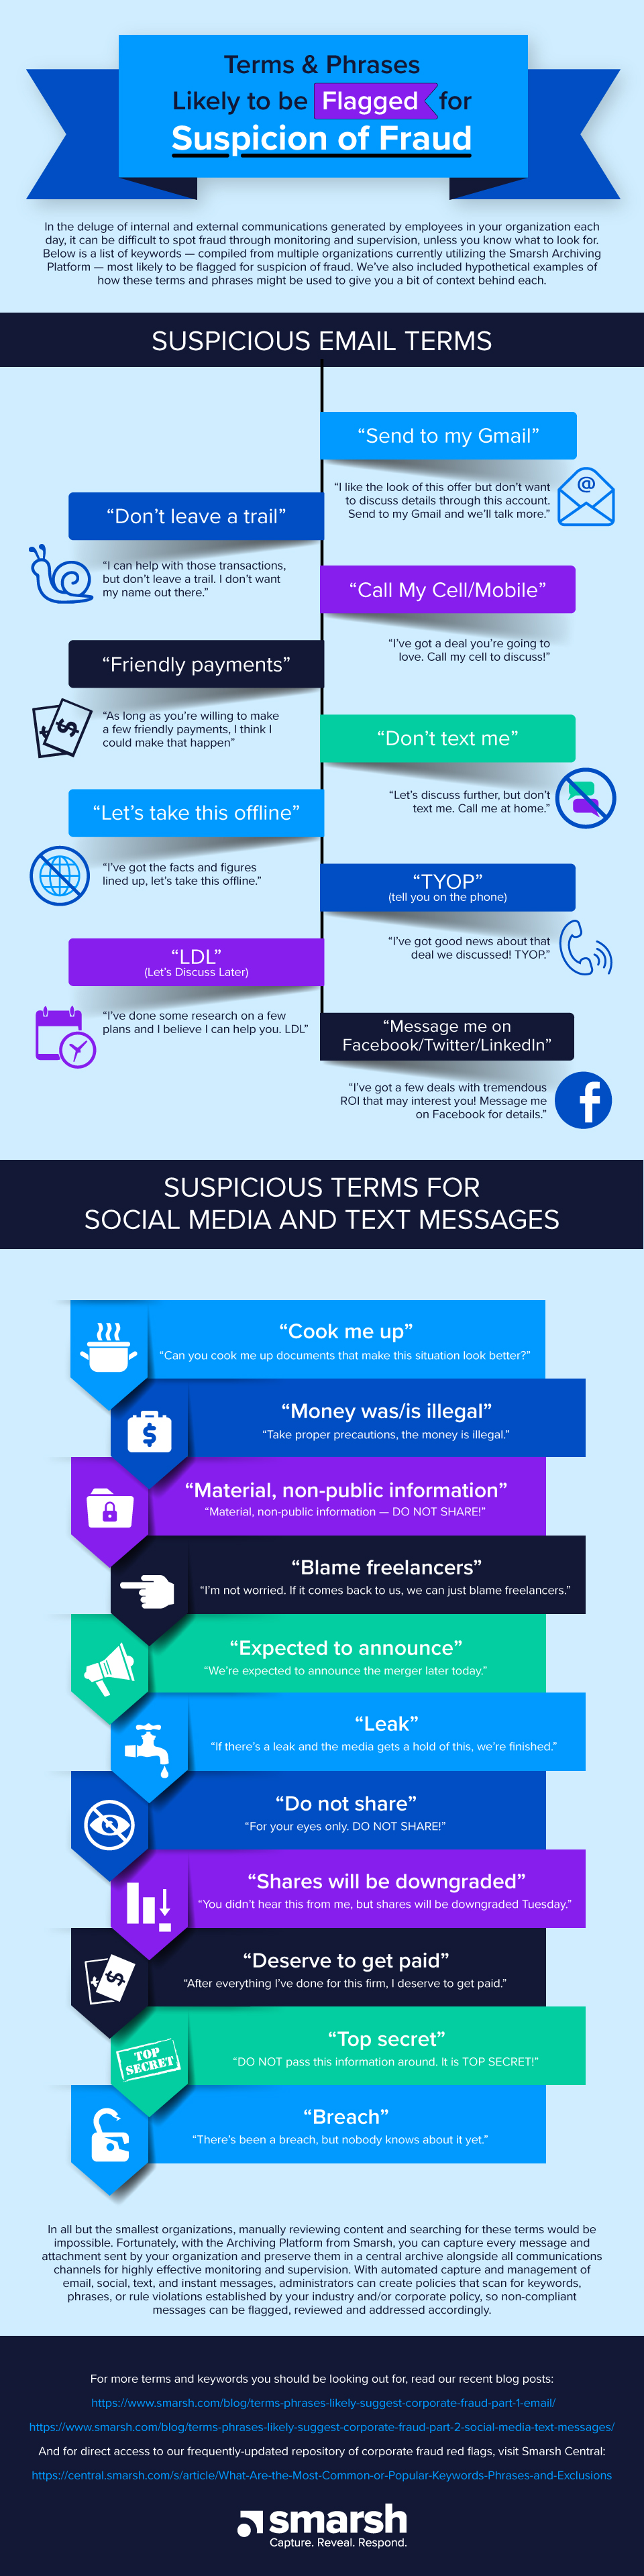 Top-Flagged-Fraud-Terms-infographic